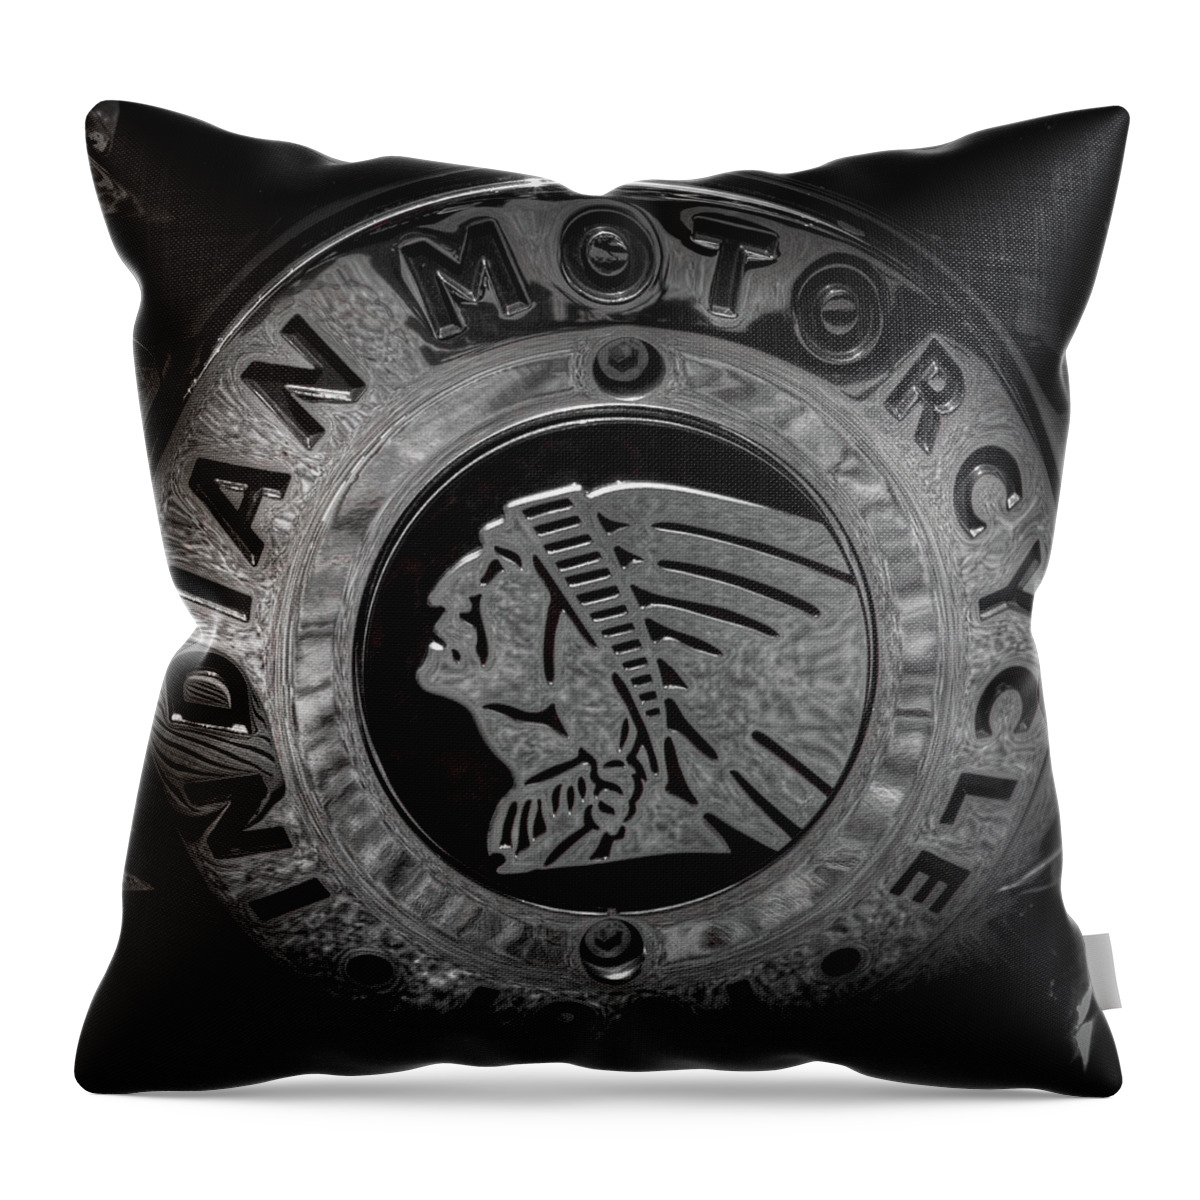 Indian Motorcycle Logo Throw Pillow featuring the photograph The Indian Motorcycle Logo by David Patterson